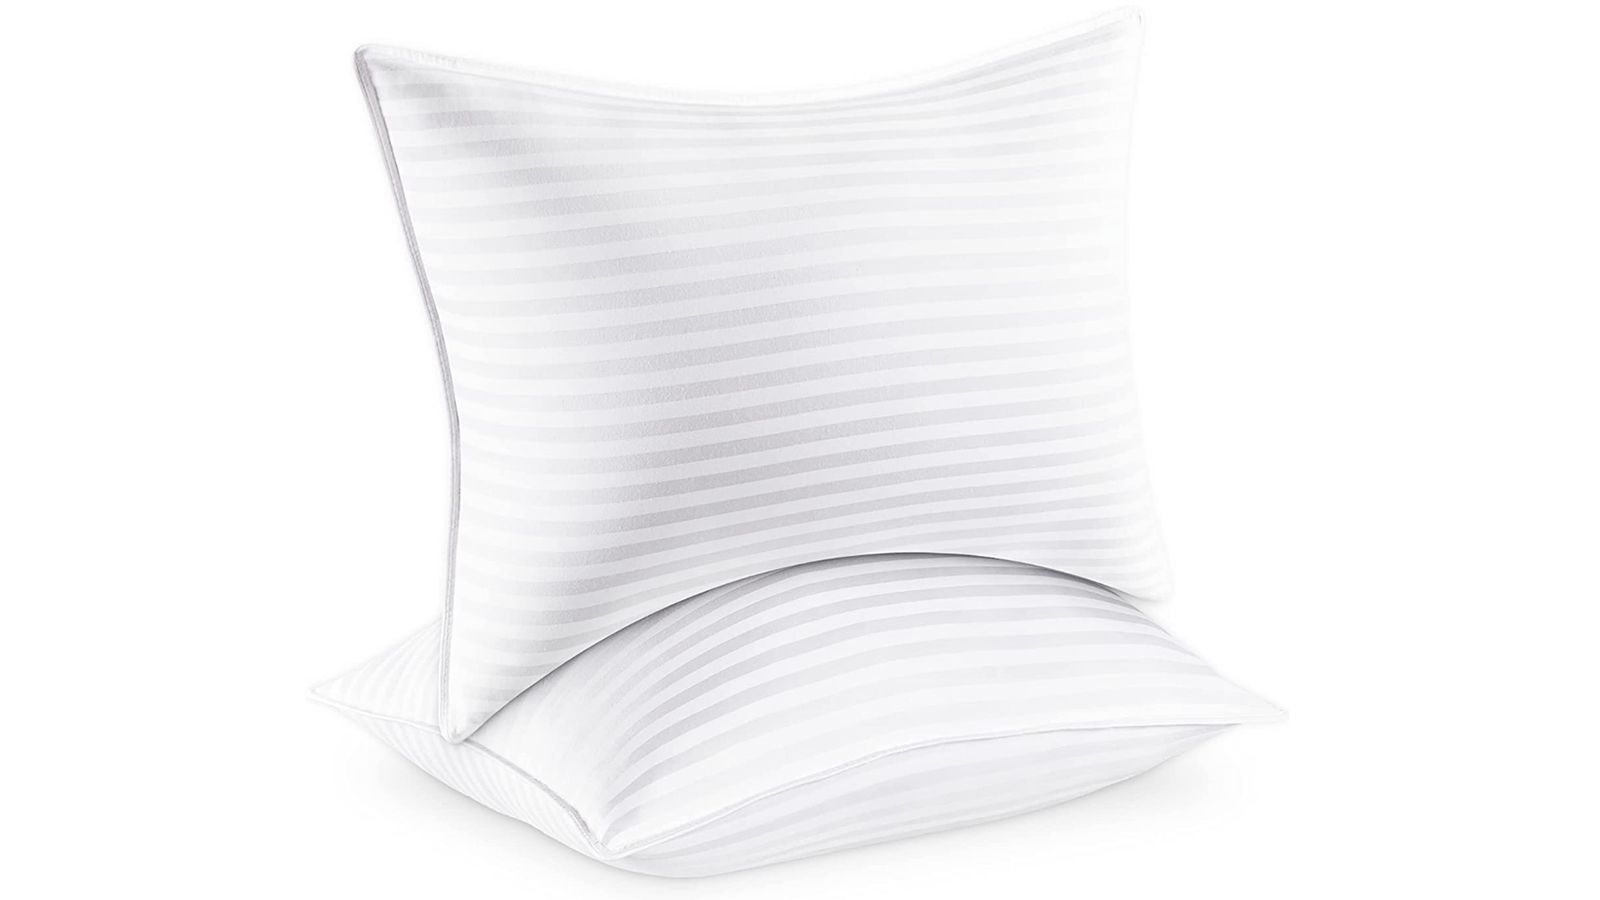 Shop Beckham Hotel pillows at 36% off for October Prime Day